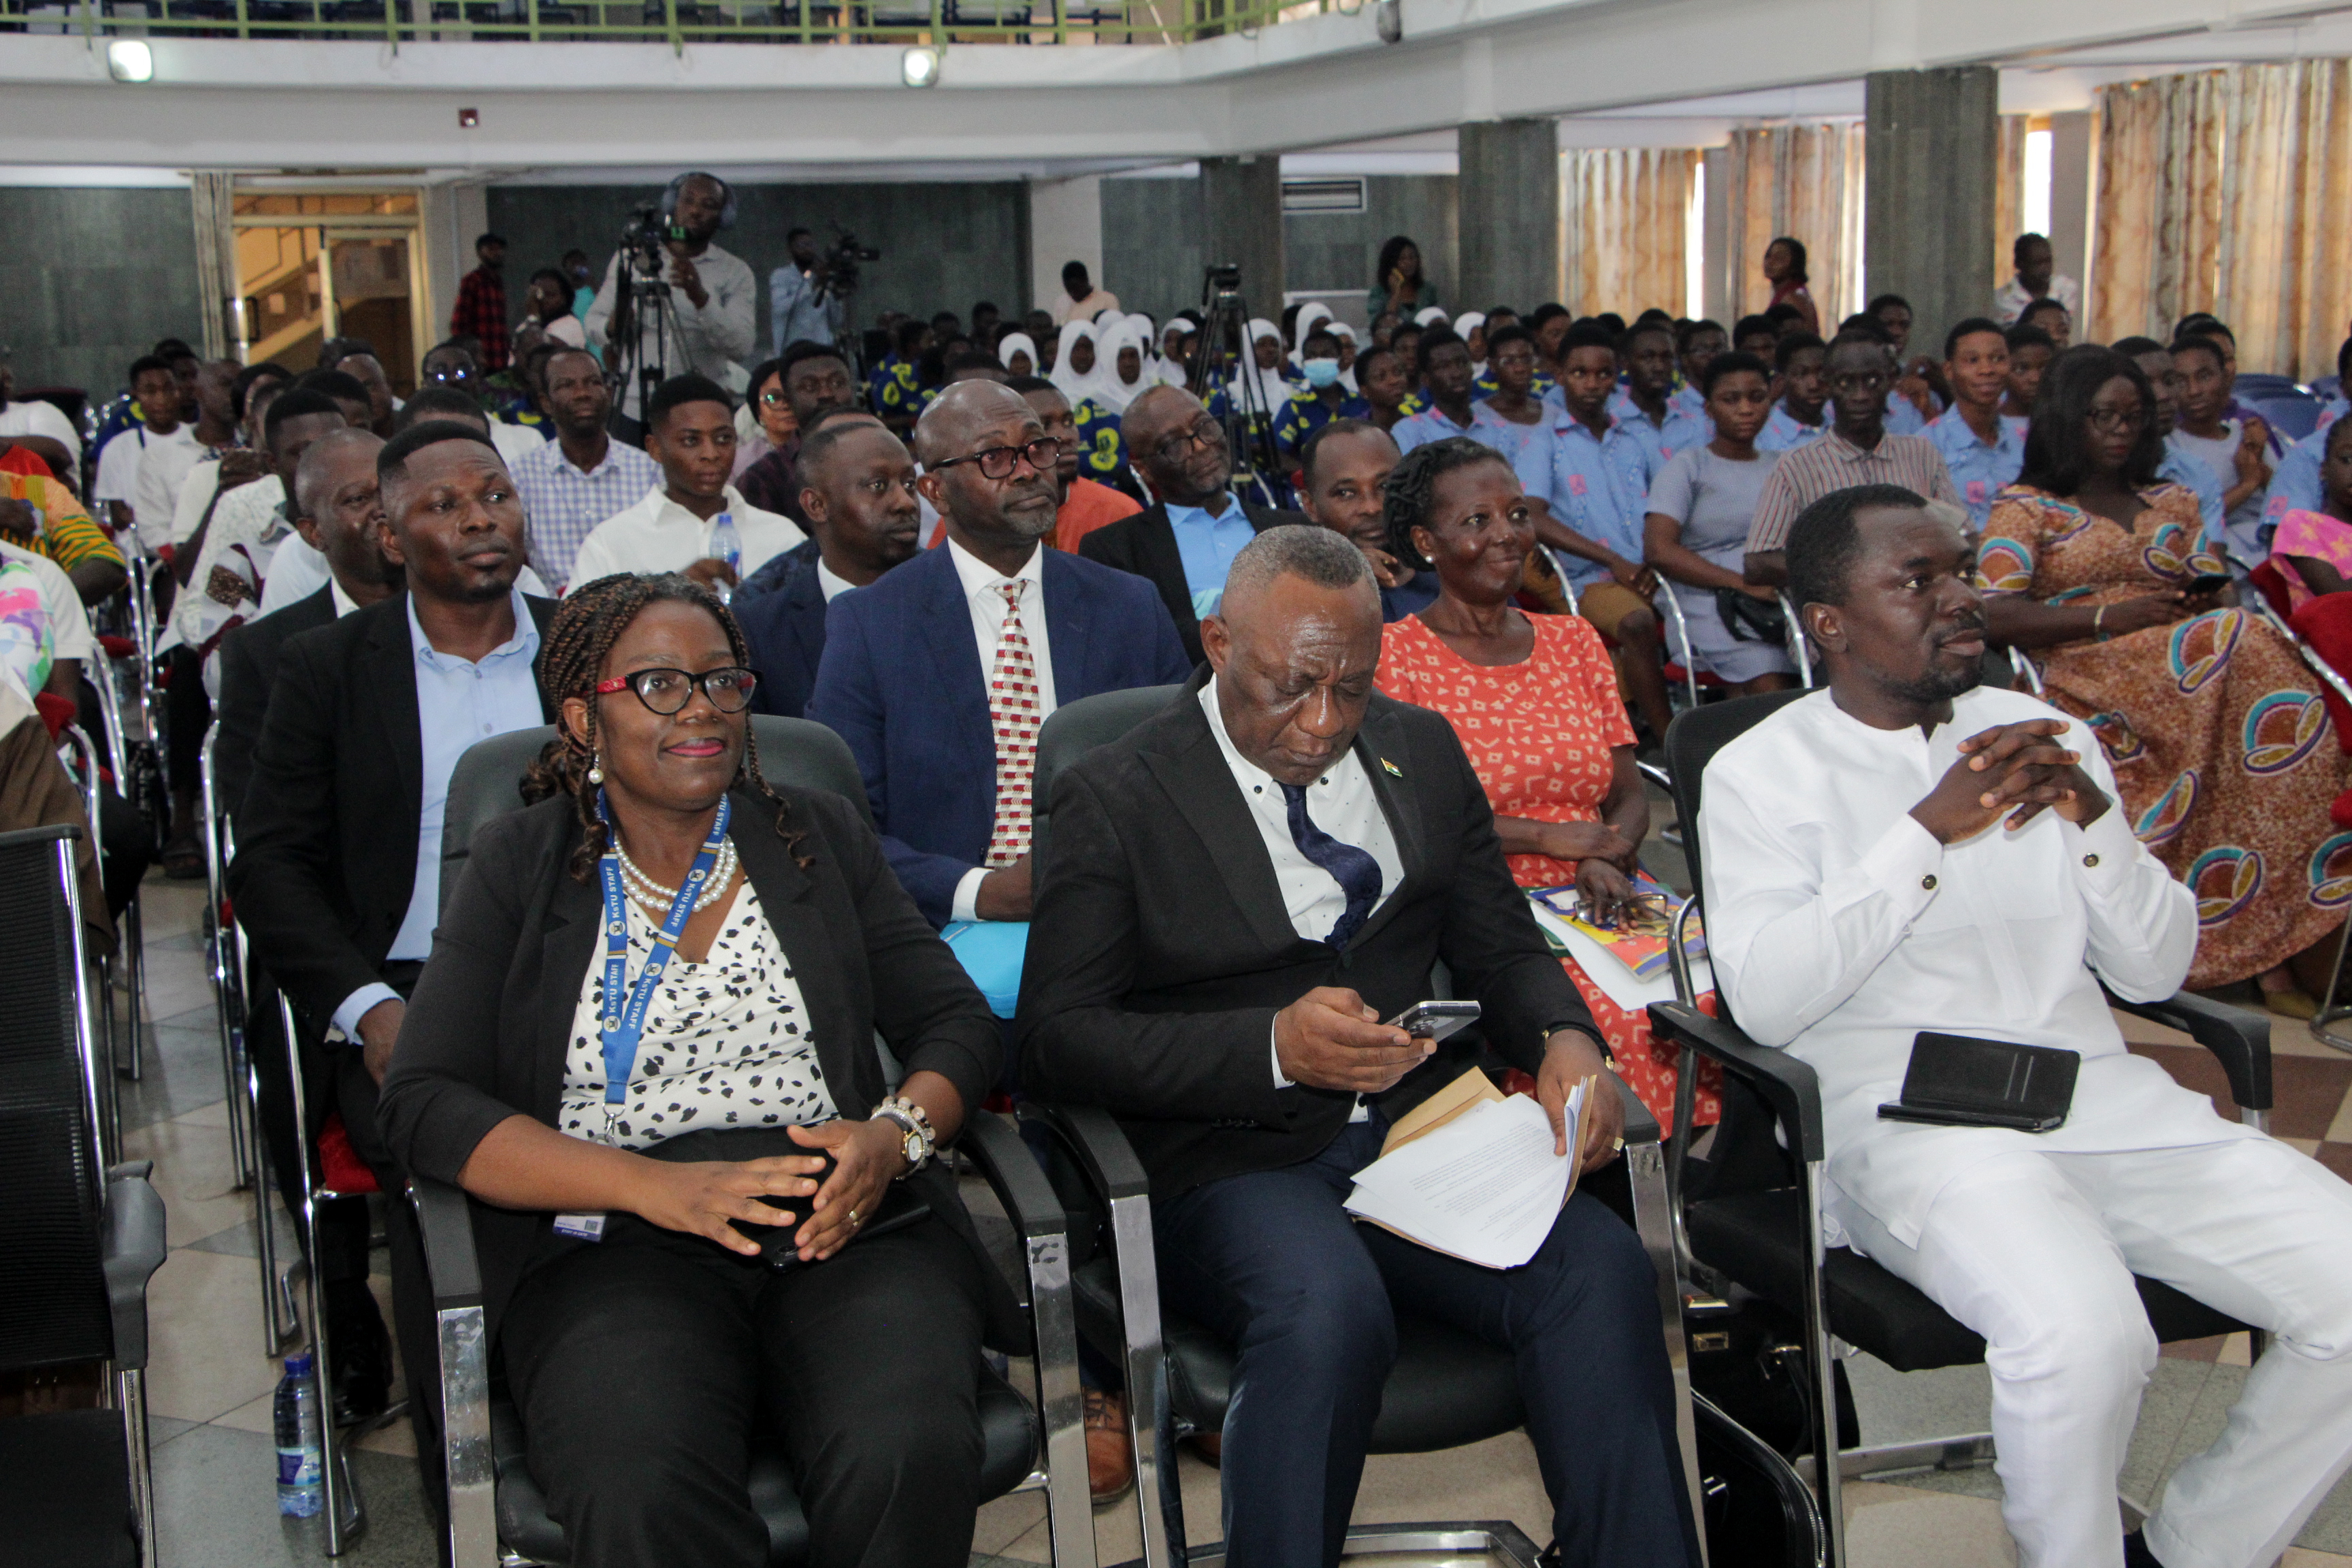 Picture: The Pro Vice-Chancellor of KsTU Ing Prof. Abena Obiri-Yeboah (left on the first row), seated with Dr. Henry K. Kokofu (middle) and Prof. Smart Sarpong (right) during the programme.